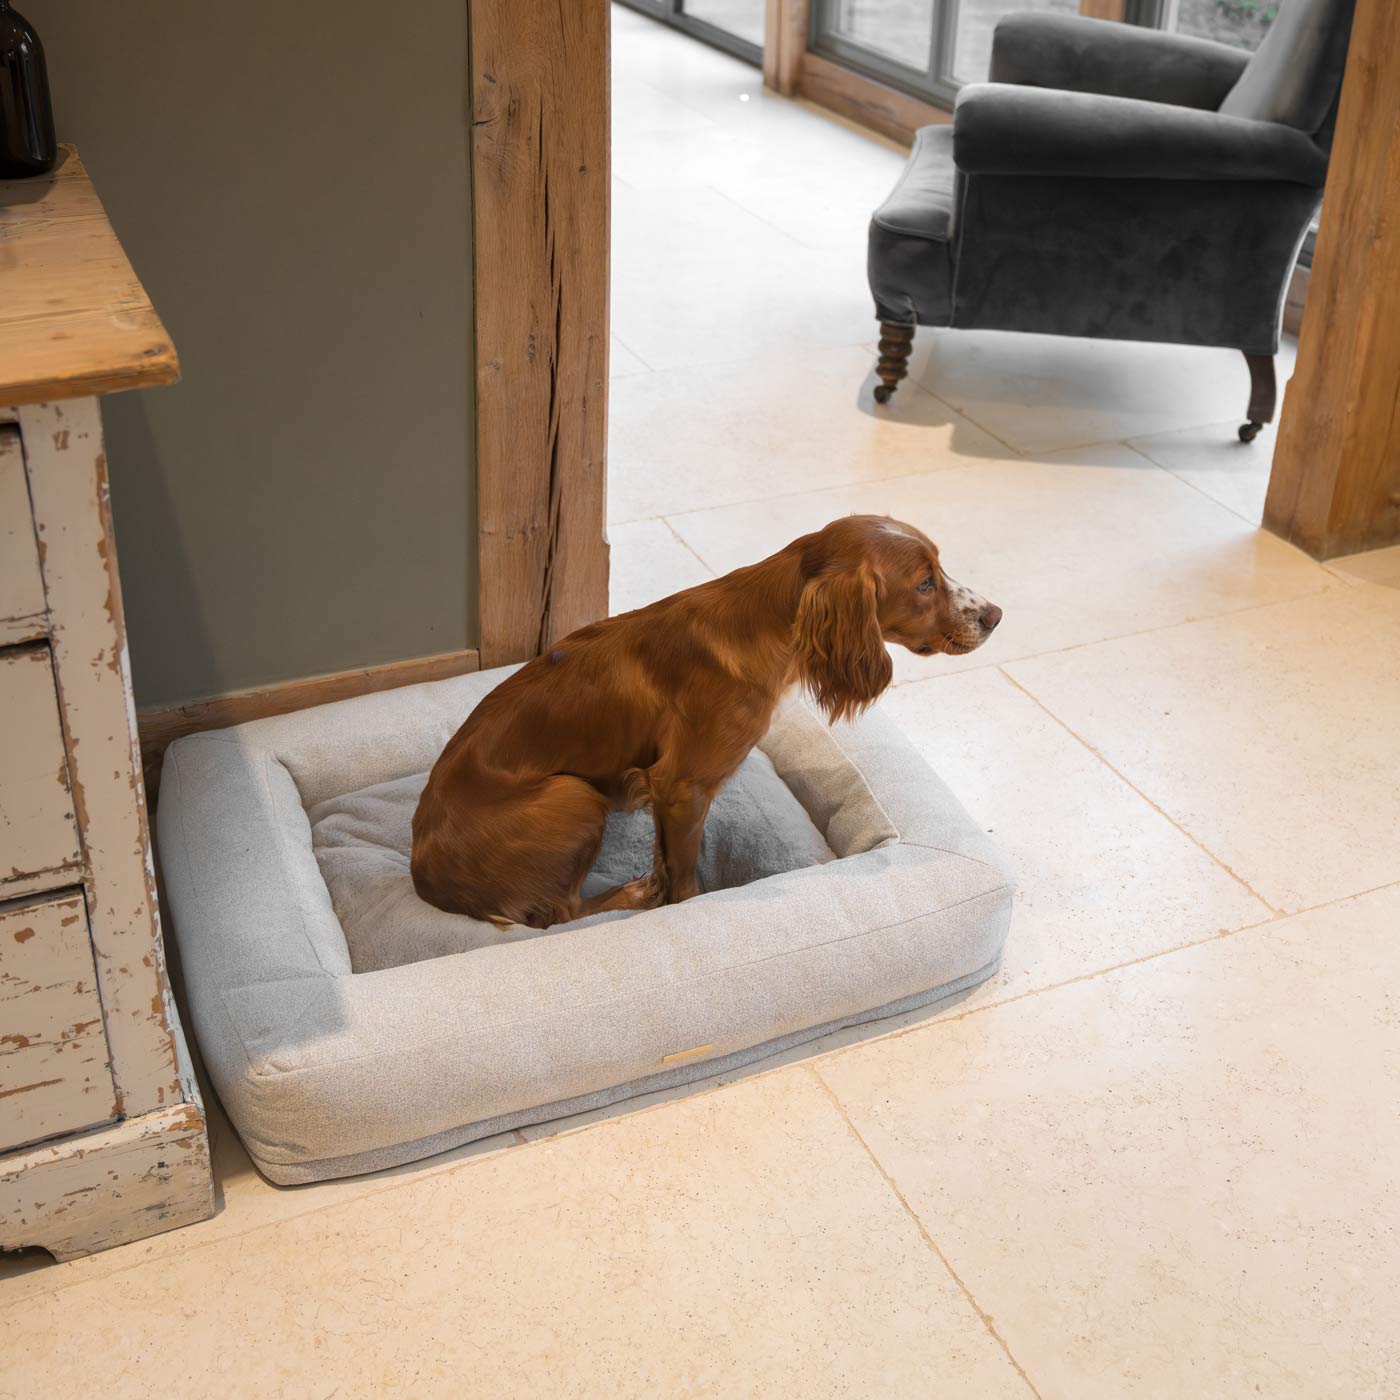 Discover Our Luxurious Comfort Cube Dog Bed in Ivory, featuring Removable covers for easy machine washing and a non slip wipeable base. This super soft pet bed offers the ultimate comfort to your furry friend! Bringing Your Canine Companion The Perfect Bed For Dogs To Curl Up To! Available Now at Lords & Labradors